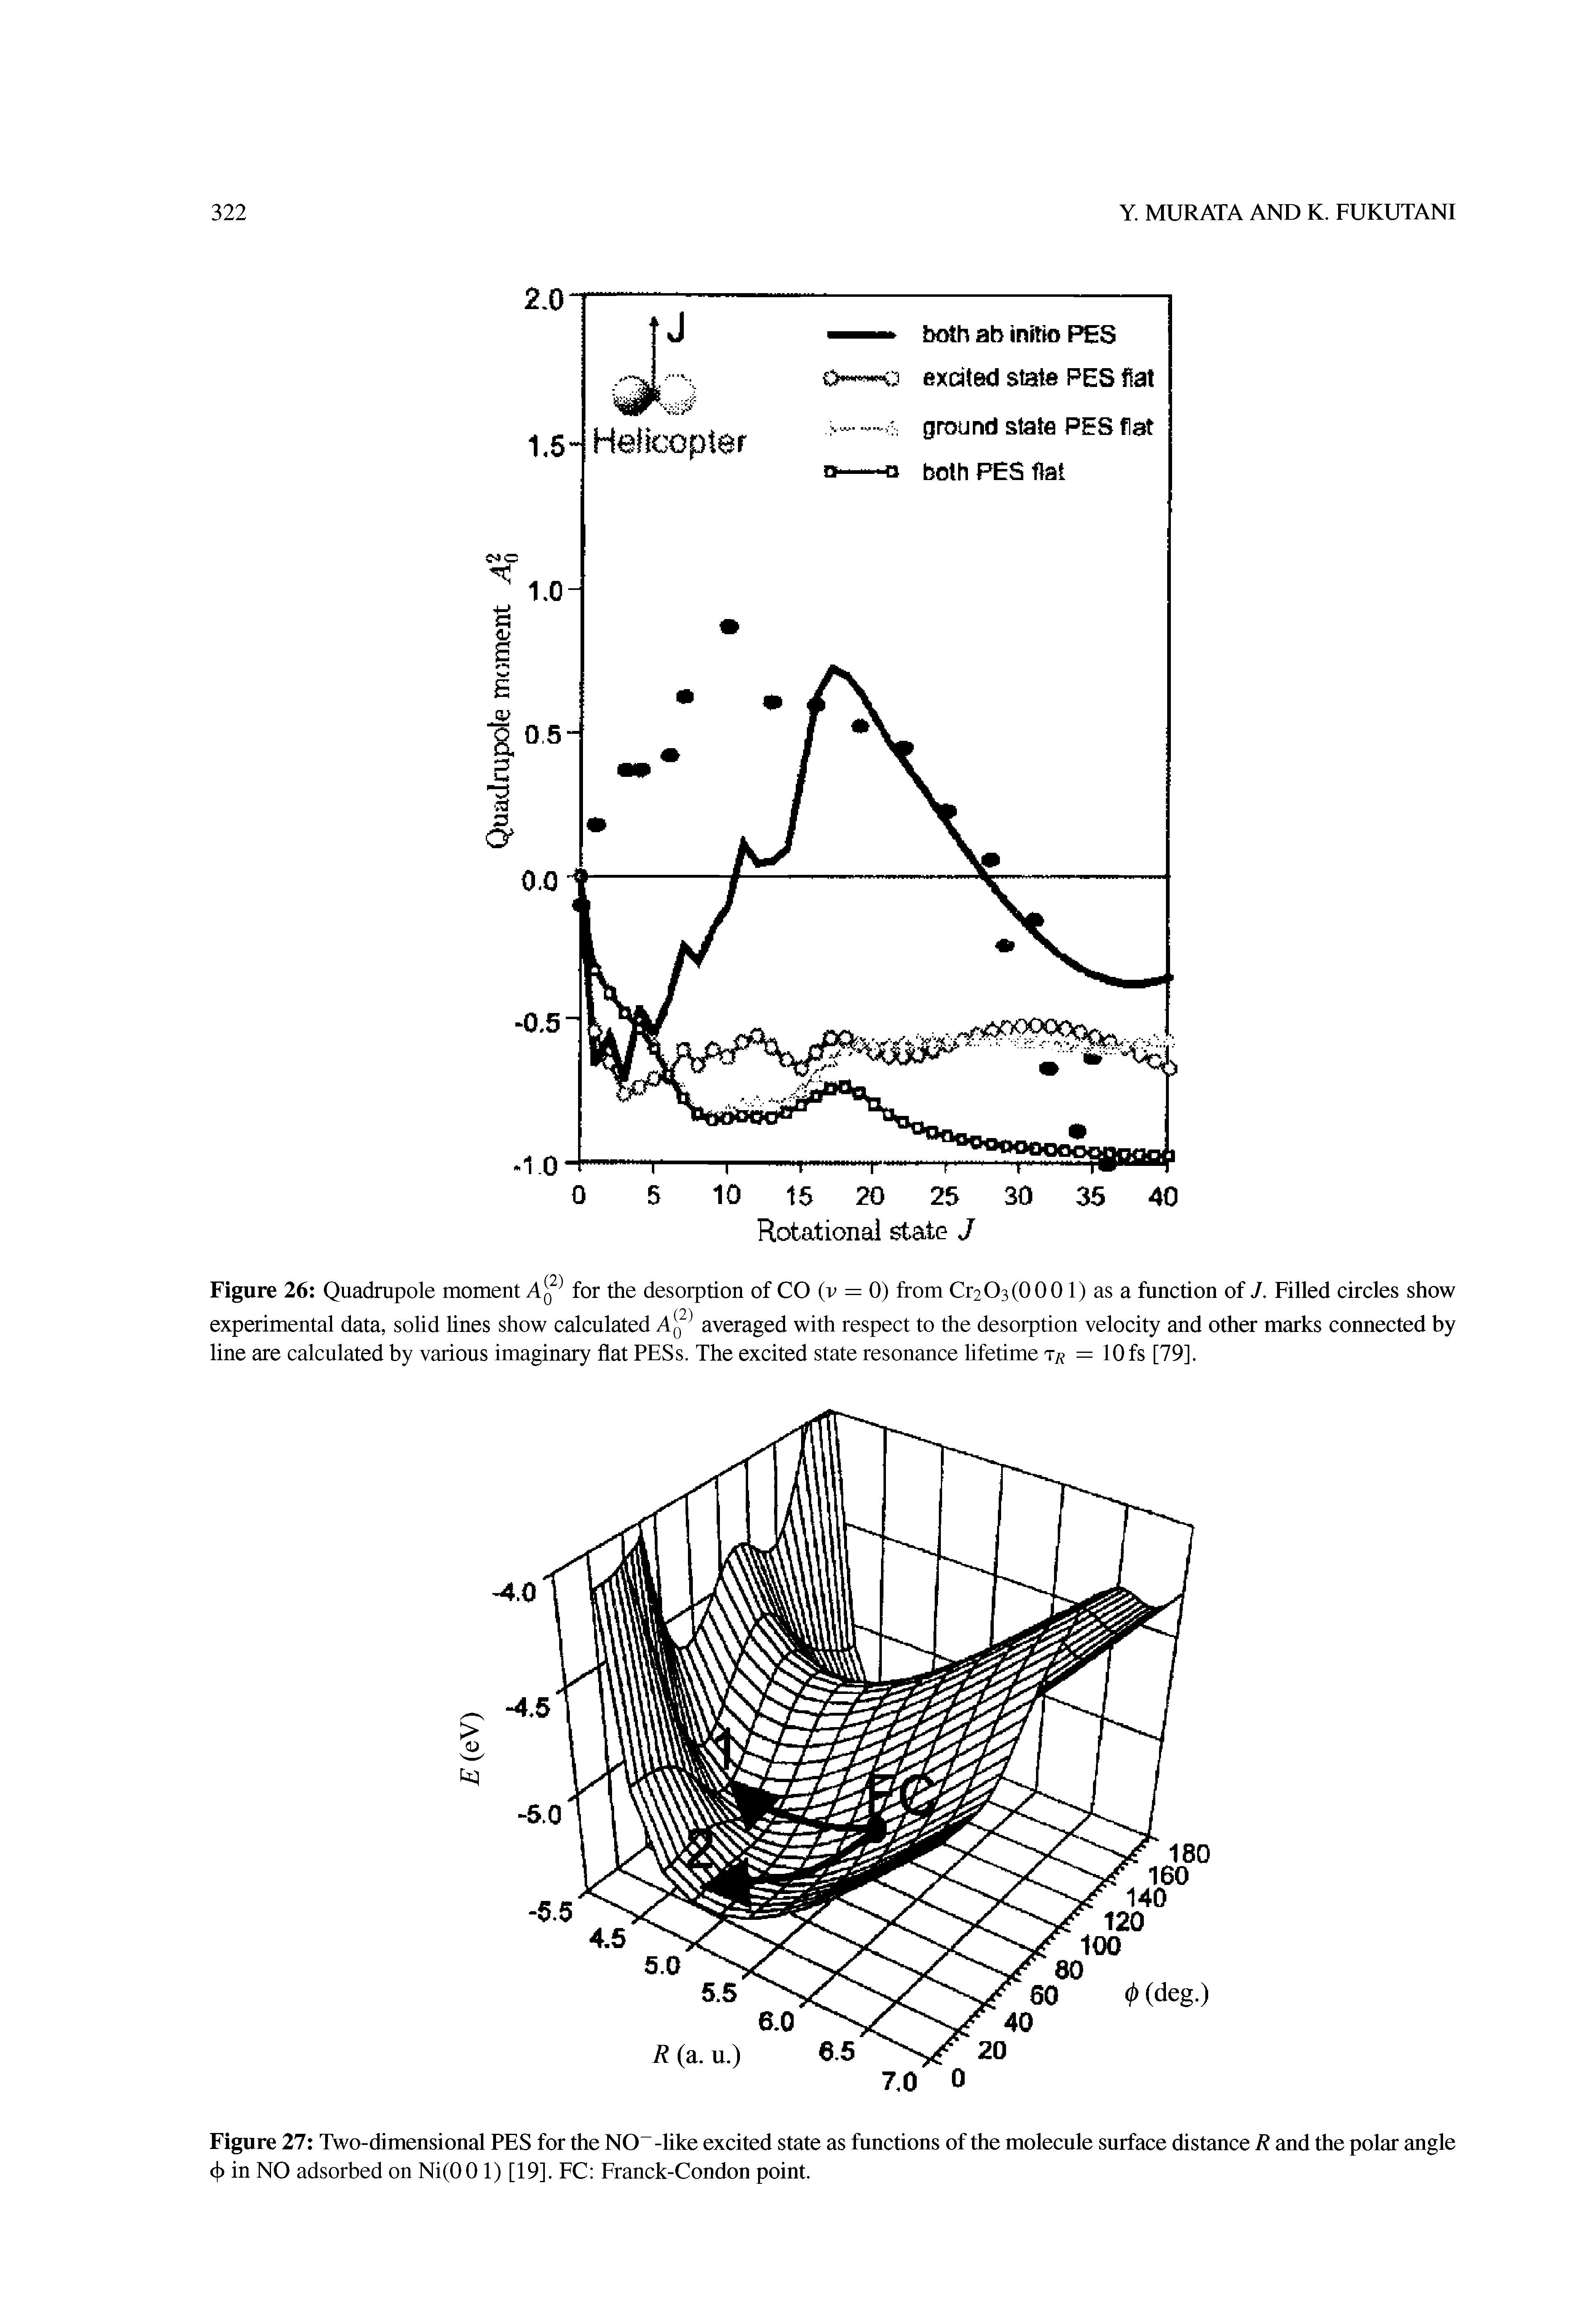 Figure 27 Two-dimensional PES for the NO -like excited state as functions of the molecule surface distance R and the polar angle 4> in NO adsorbed on Ni(00 1) [19]. FC Franck-Condon point.